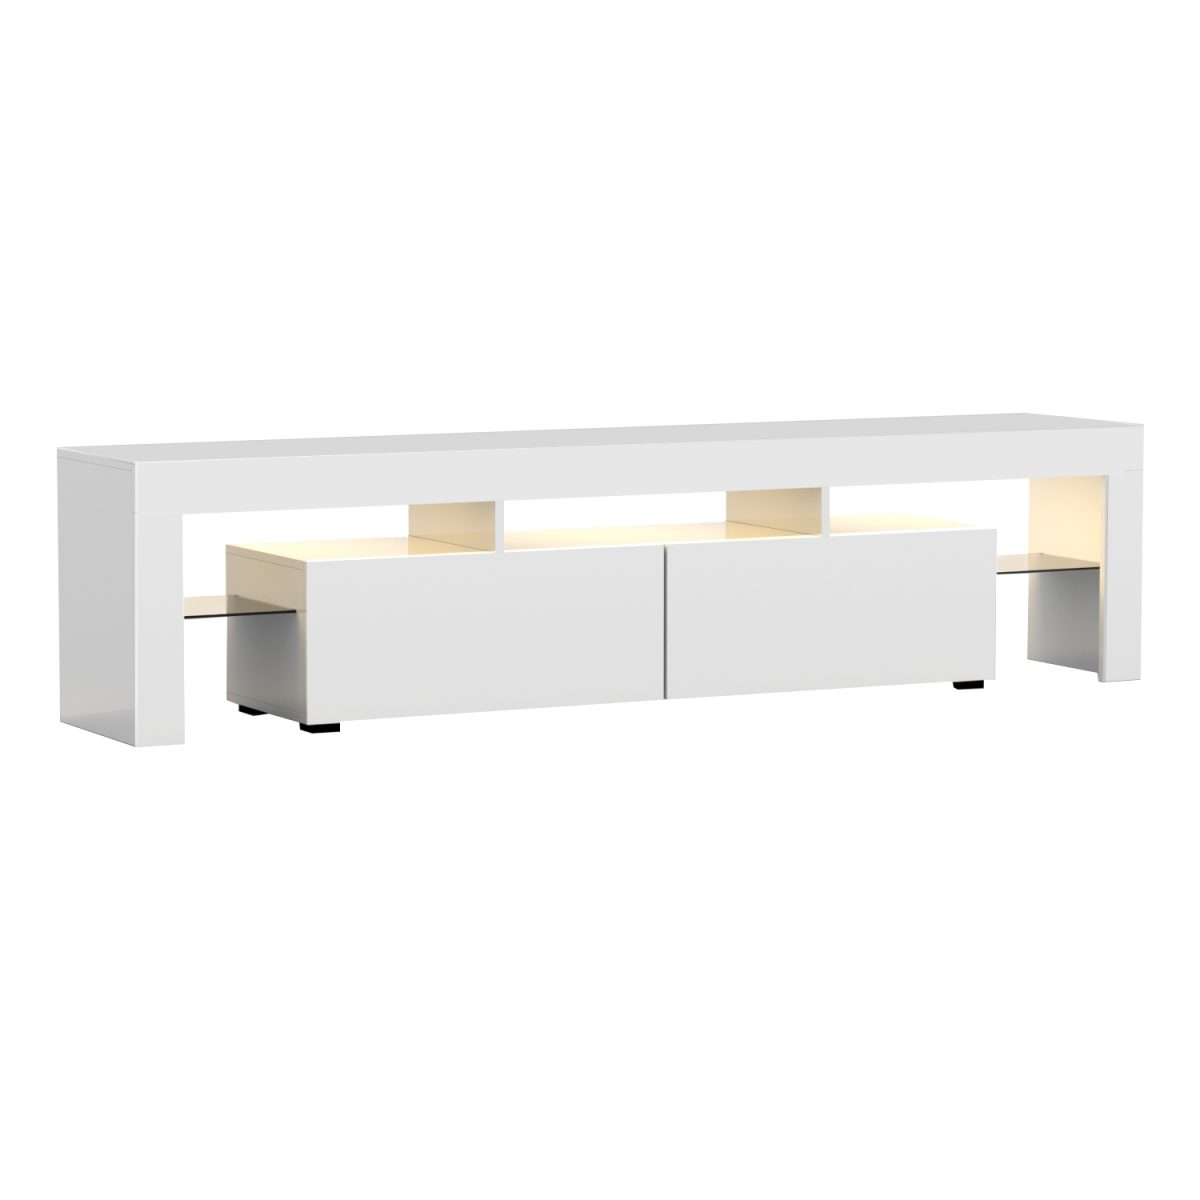 Artiss 189cm RGB LED TV Stand Cabinet Entertainment Unit Gloss Furniture Drawers Tempered Glass Shelf – White